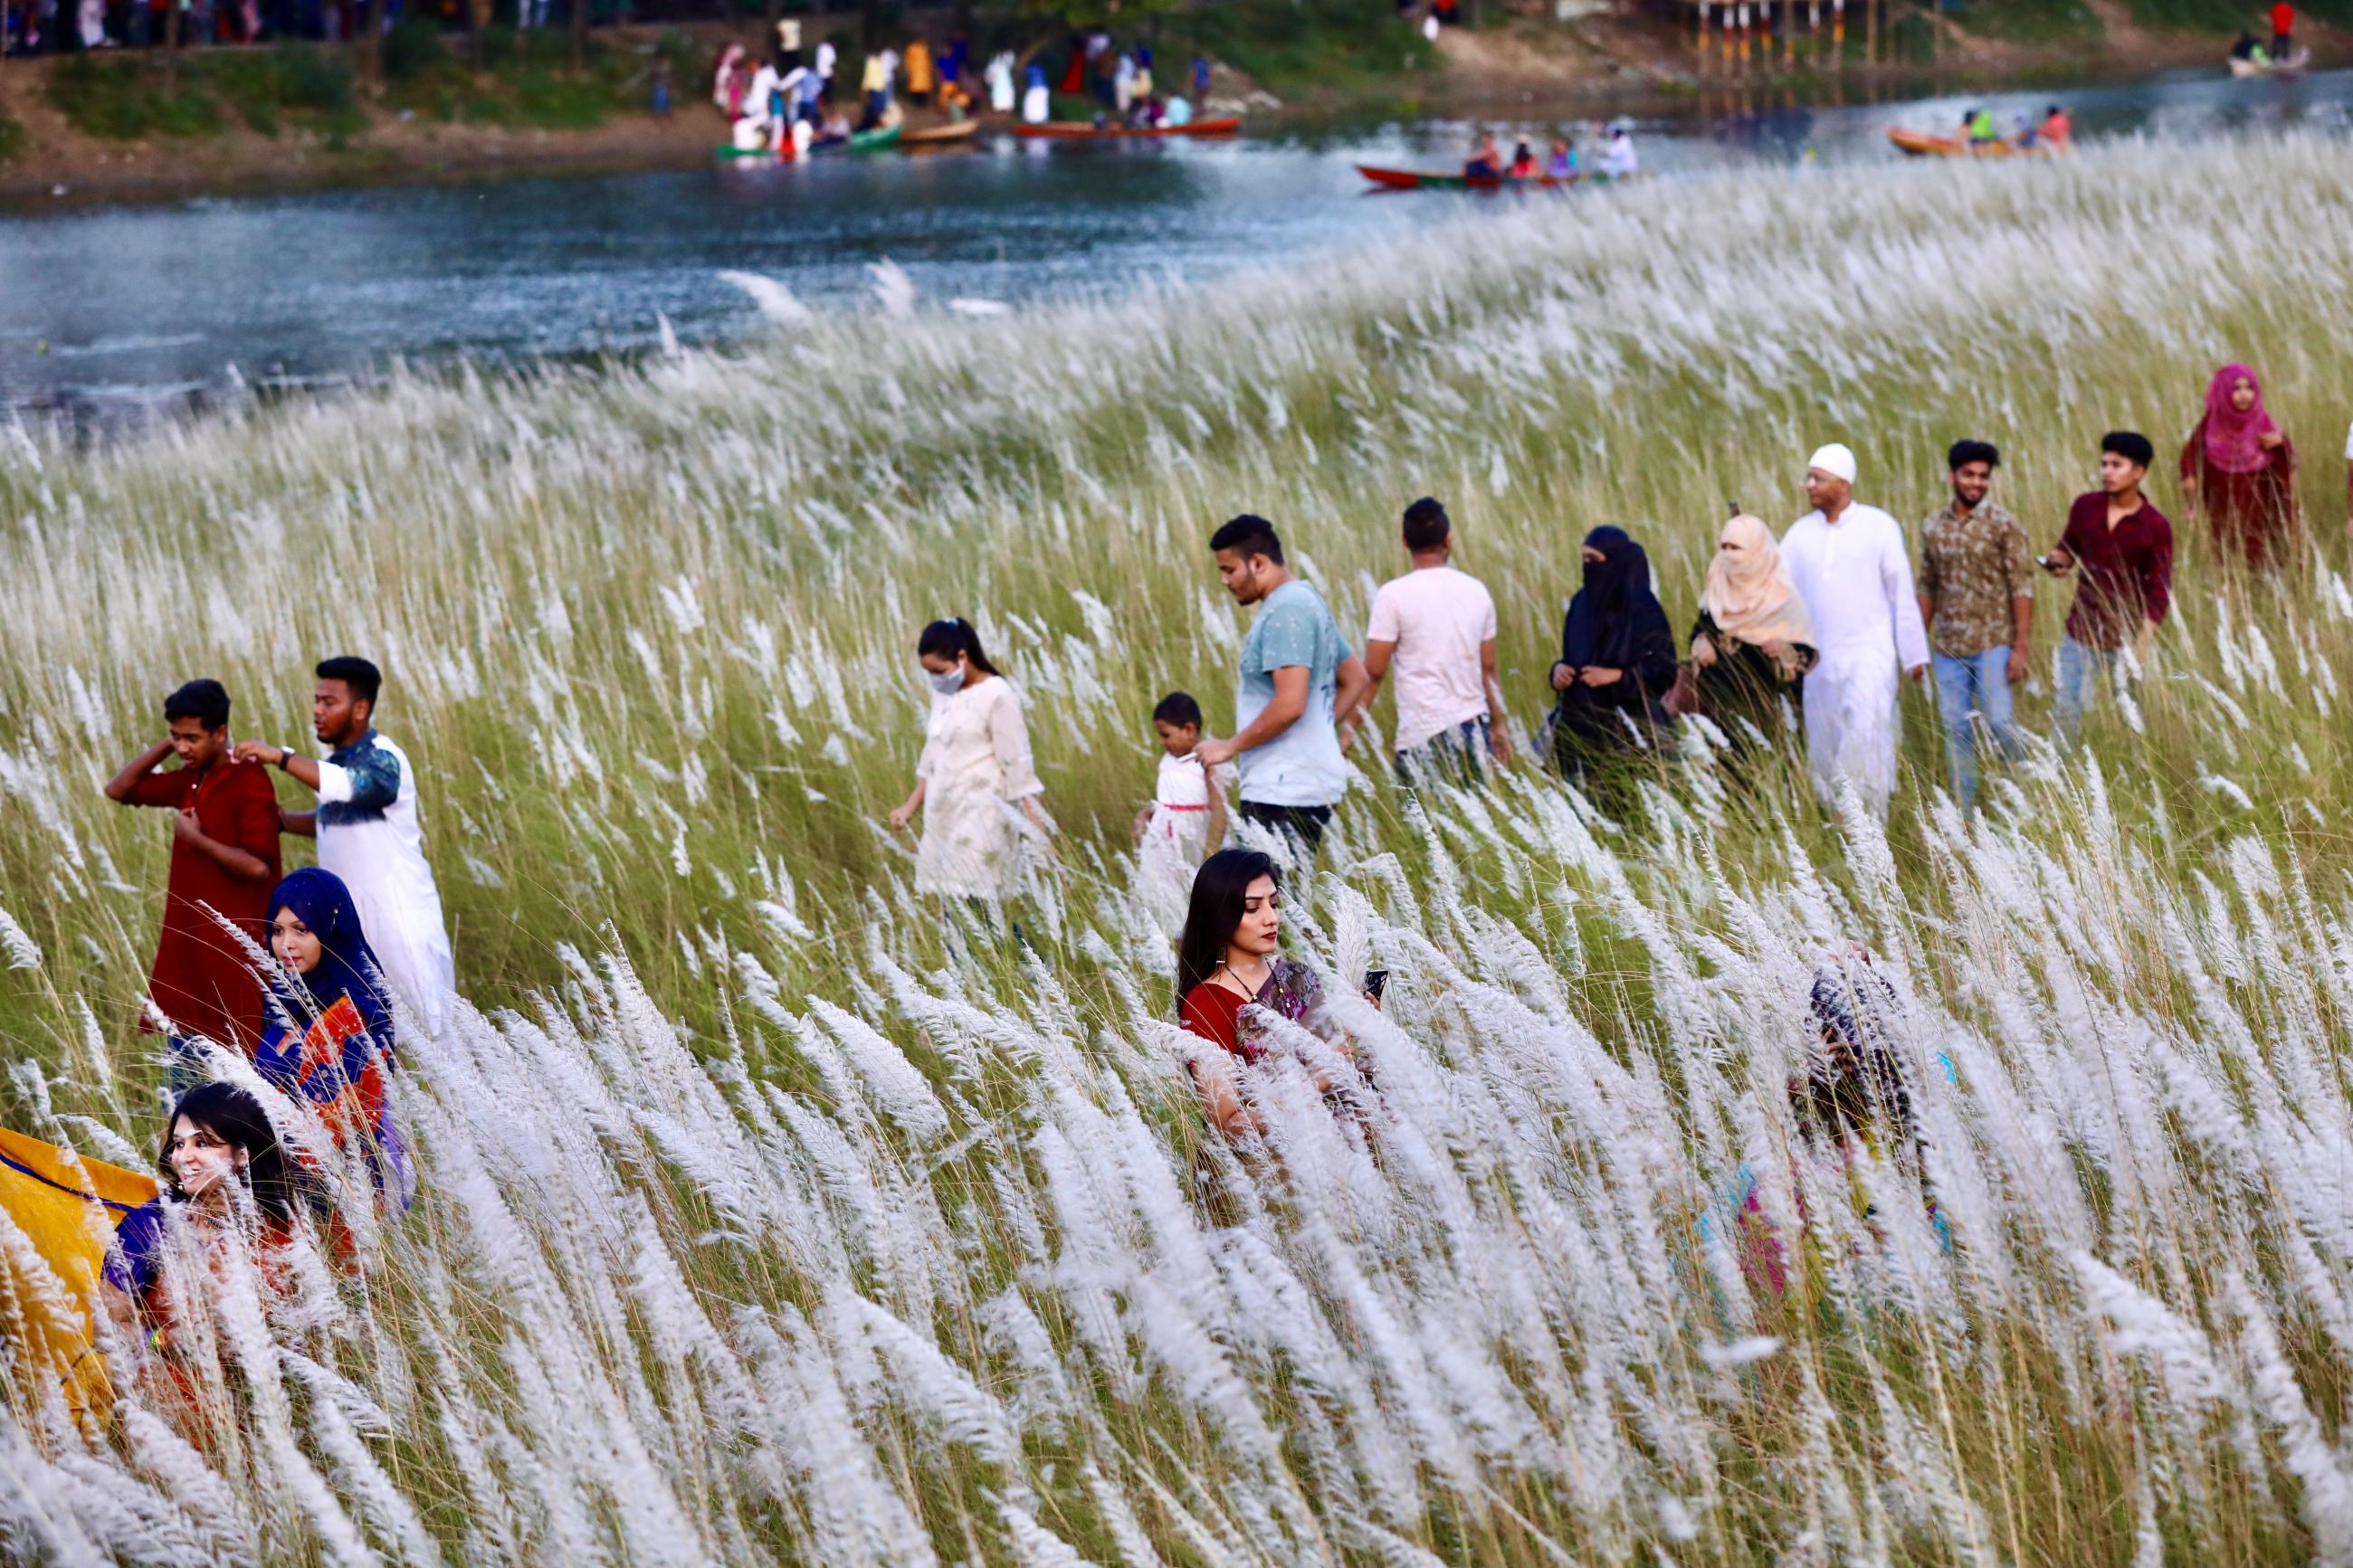 People in colorful clothes stand in a field of catkins, a tall grassy plant with green stems and white, feather-like tufts at the top that are about chest-high. In the background, a blue stream flows. 